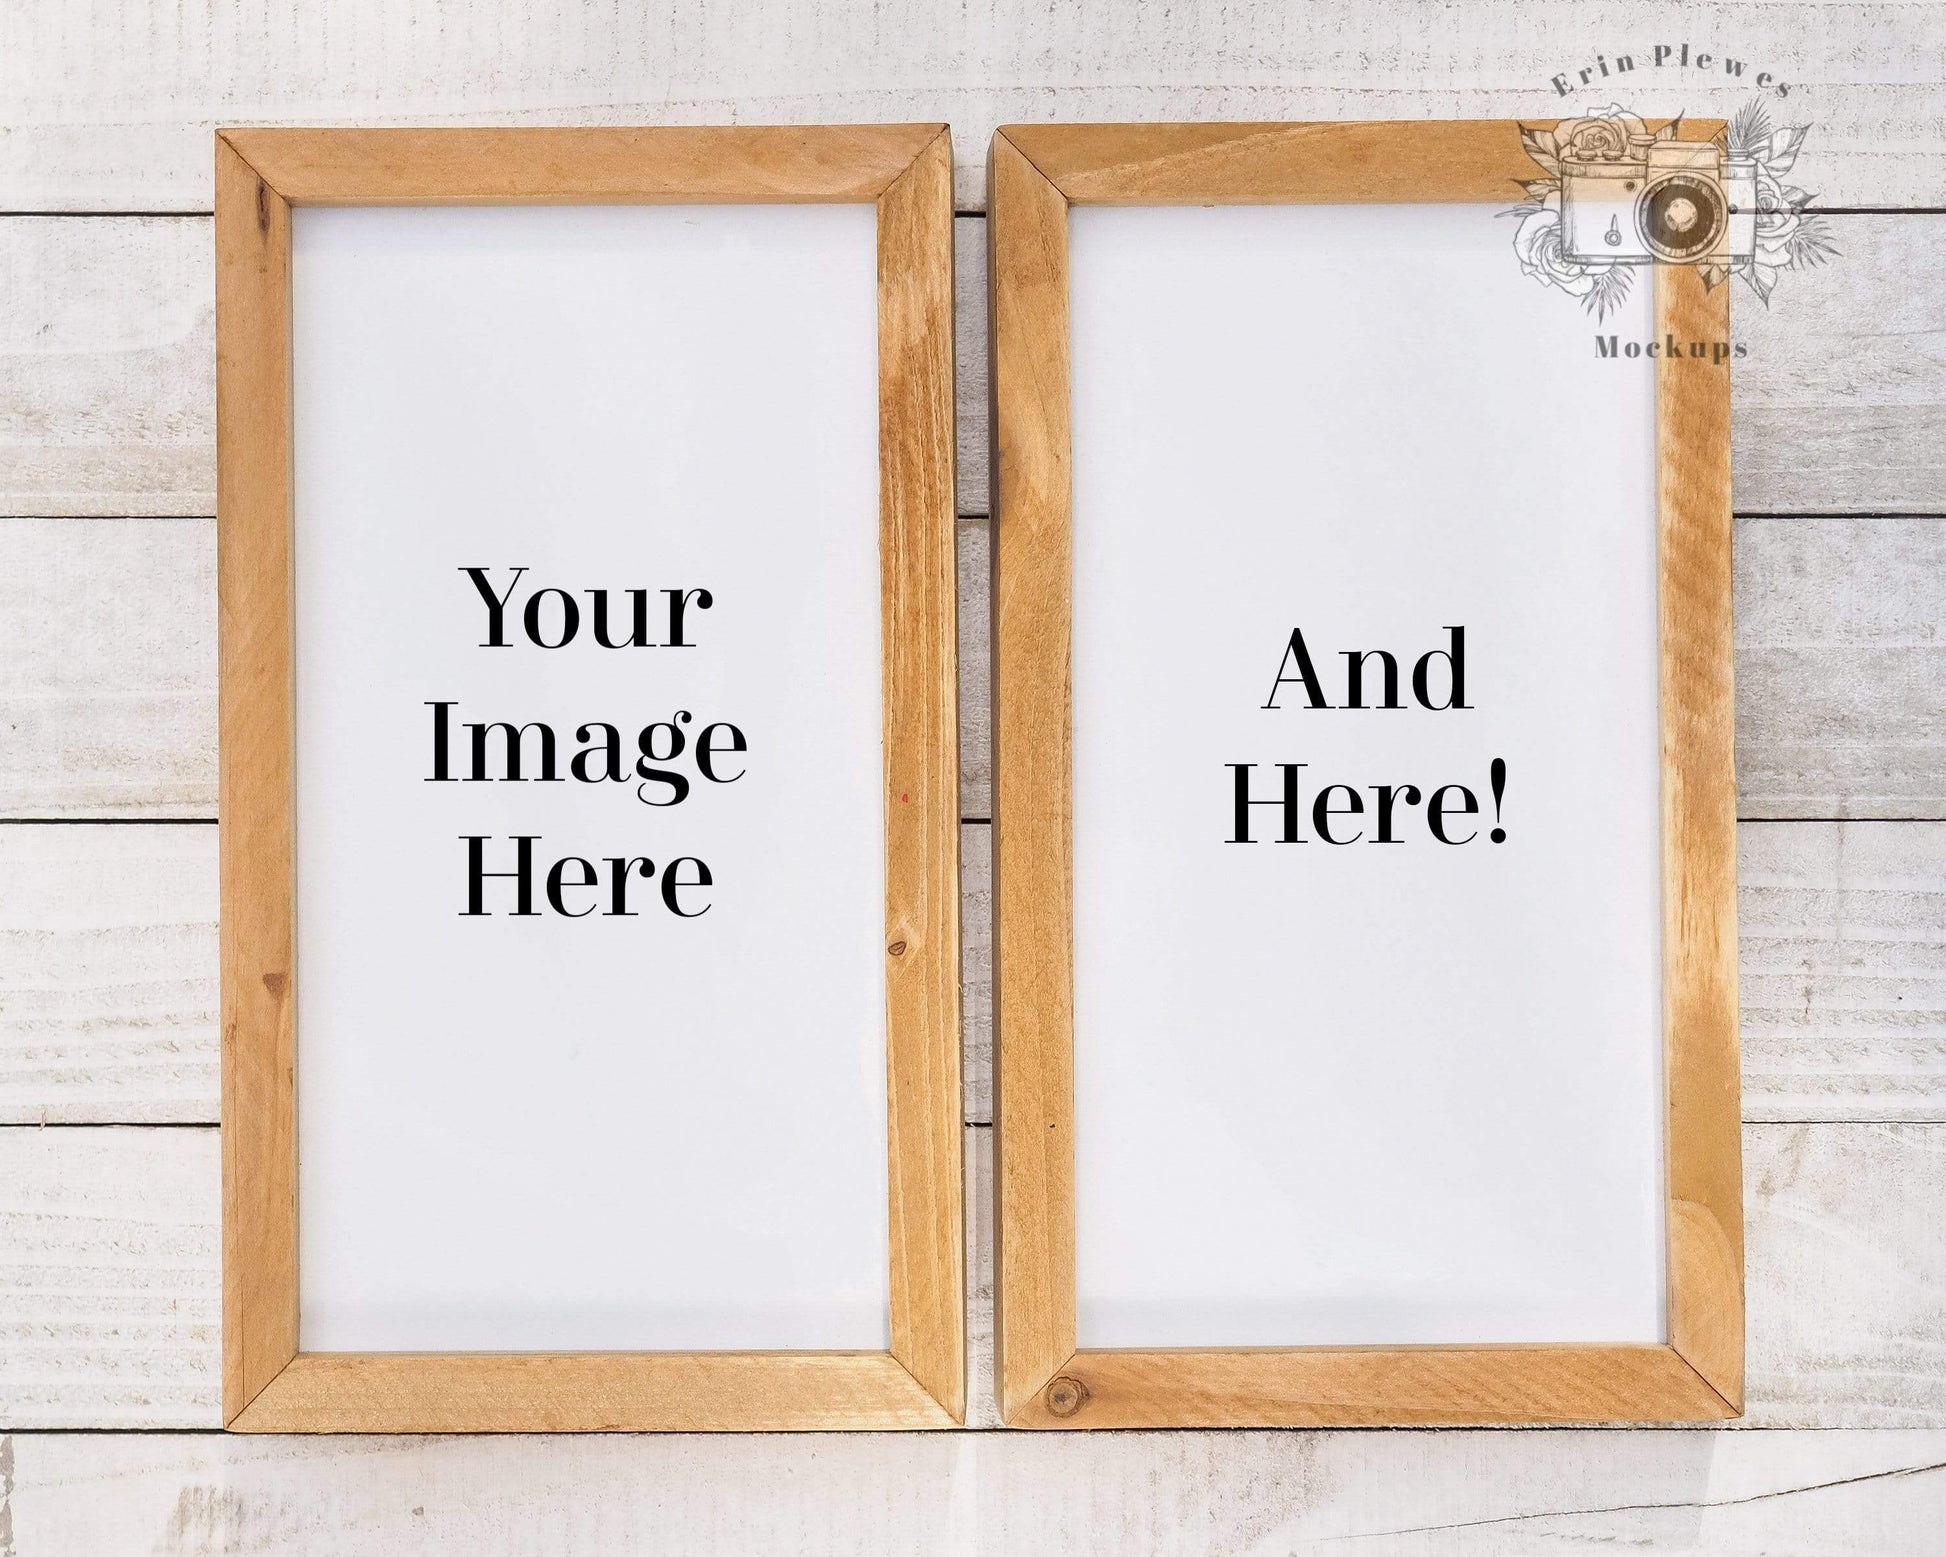 Erin Plewes Mockups Sign Mockup, Wood Sign Mock-up, 2 Signs on white rustic wood stock photo, Farmhouse Mock Up for your svg